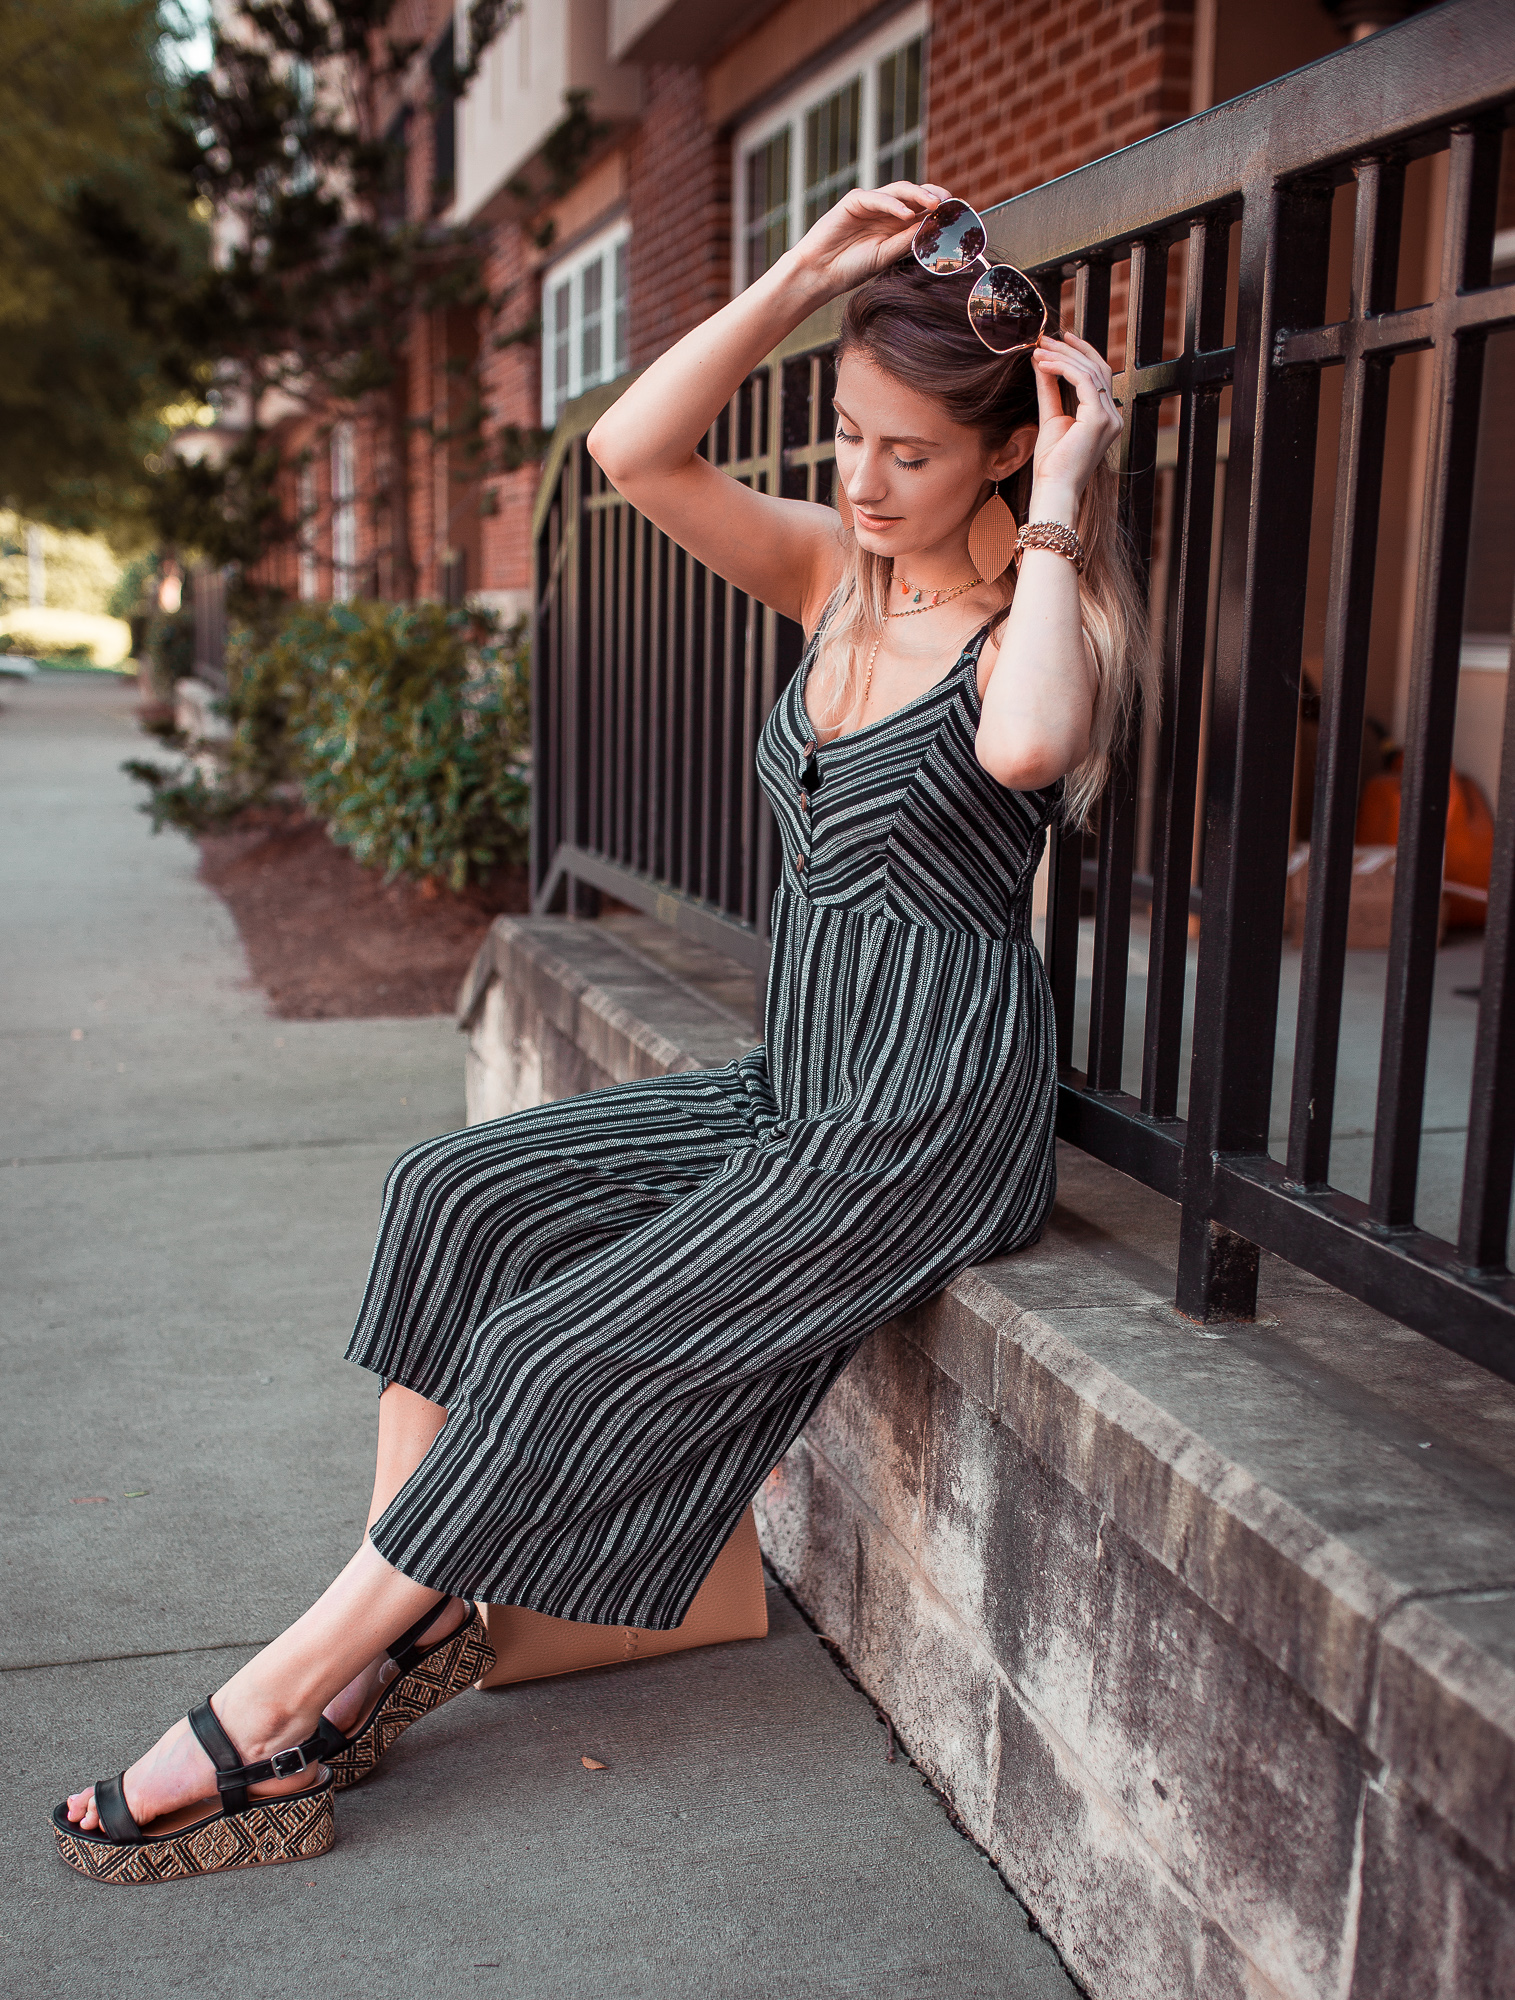 North Carolina fashion and lifestyle blogger Jessica Linn styling a navy striped jumpsuit from Forever21, platform sandals from Target, a layered tassel chocker from bauble bar, and vegan leather earrings from RSA Studios.